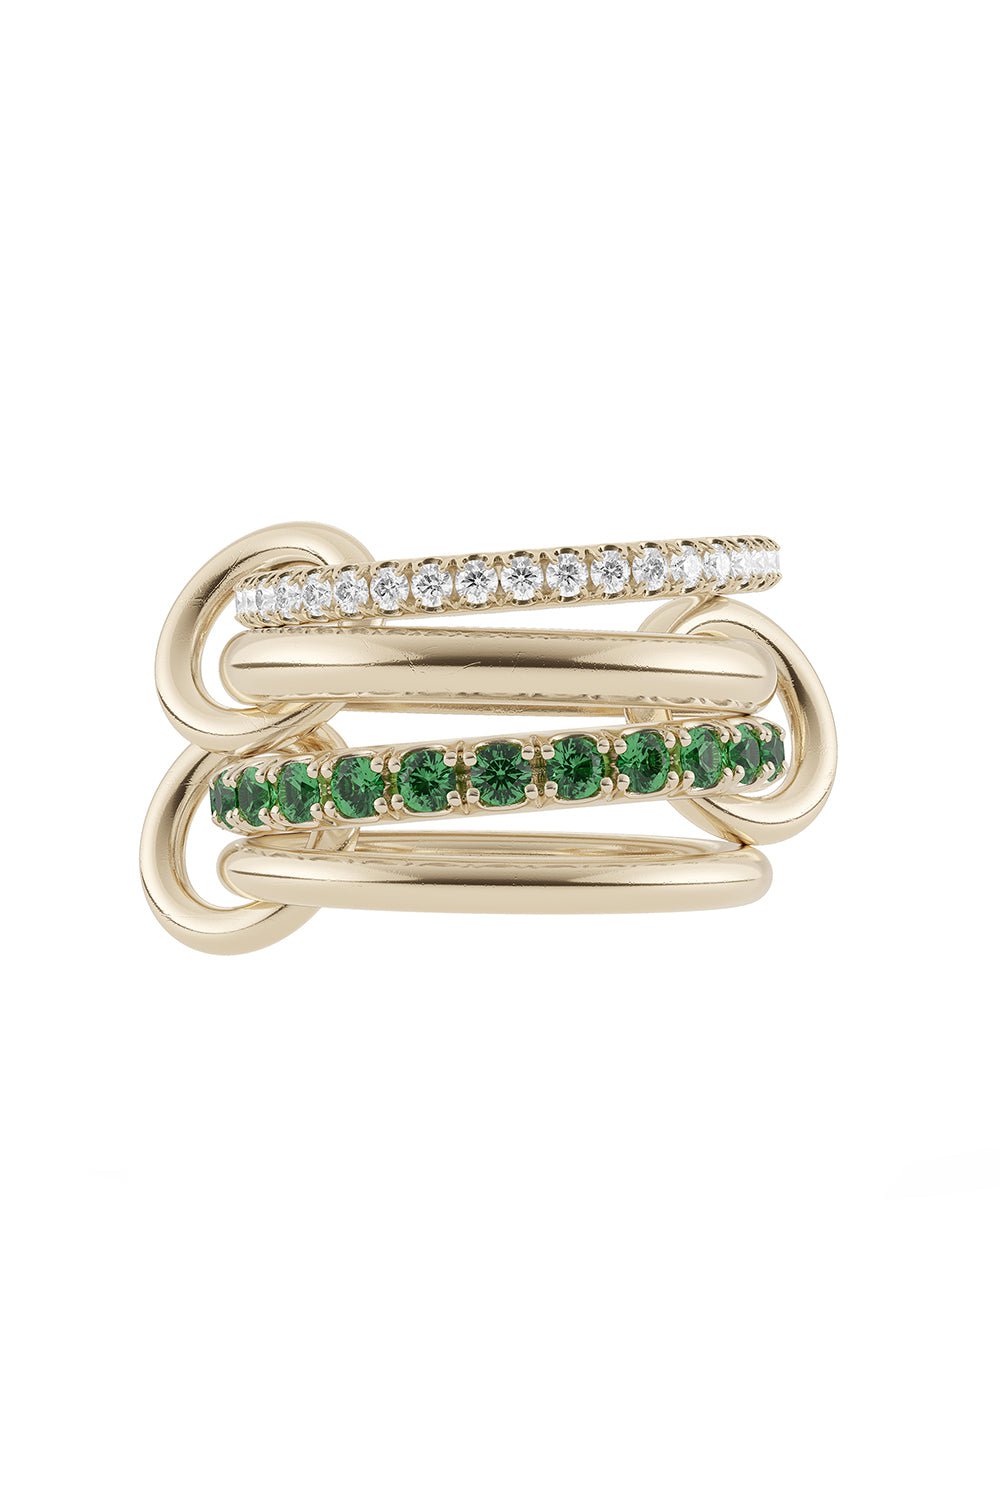 SPINELLI KILCOLLIN-Halley Emerald Four Link Ring-YELLOW GOLD